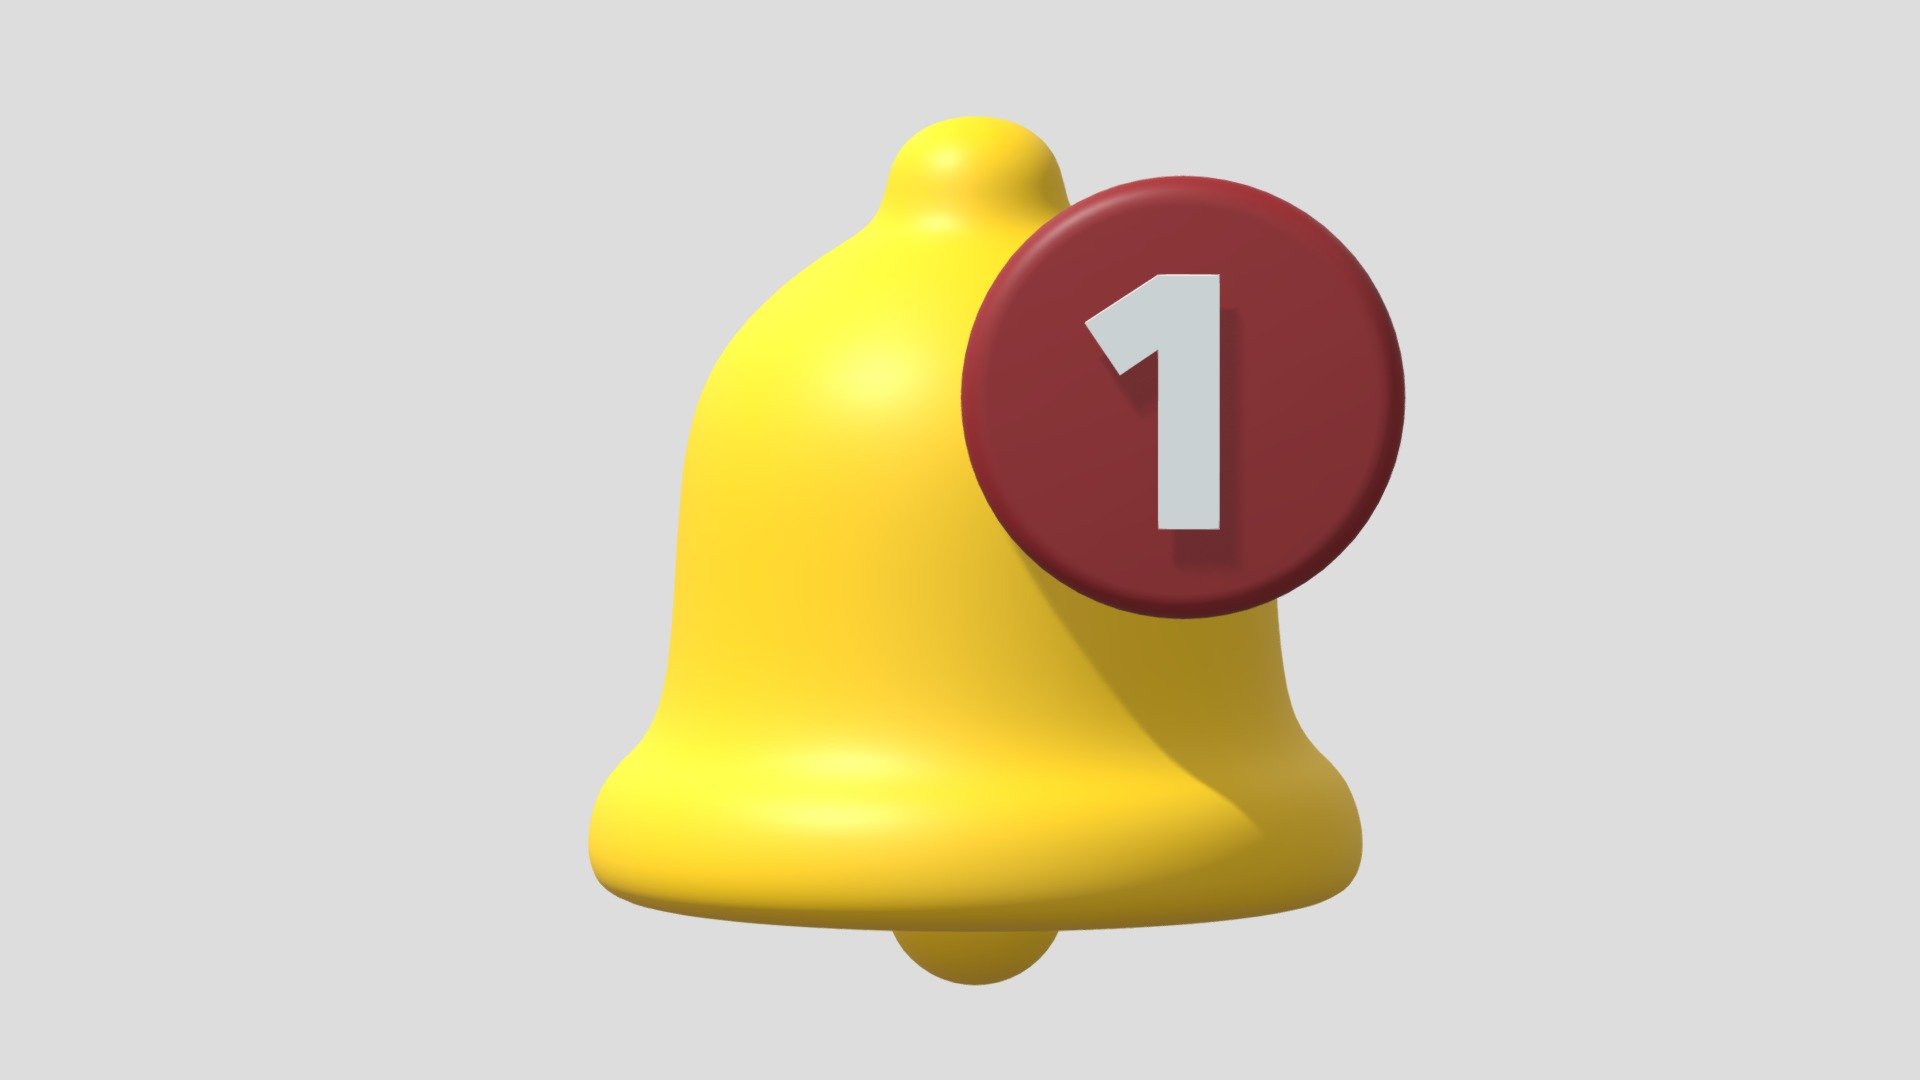 -Cartoon Notification Bell with Reminder Number.

-This product contains 12 objects.

-Total vert: 13,446 poly: 11,229 .

-Subdivision Level 3, Verts : 9,122, Faces : 9,071.

-Subdivision Level 2, Verts : 3,026, Faces : 2,927.

-Subdivision Level 1, Verts : 1,298, Faces : 1,231.

-Materials have the correct names.

-Real world scale.

-This product was created in Blender 2.8.

-Formats: blend, fbx, obj, c4d, dae, abc, stl, glb, unity.

-We hope you enjoy this model.

-Thank you 3d model